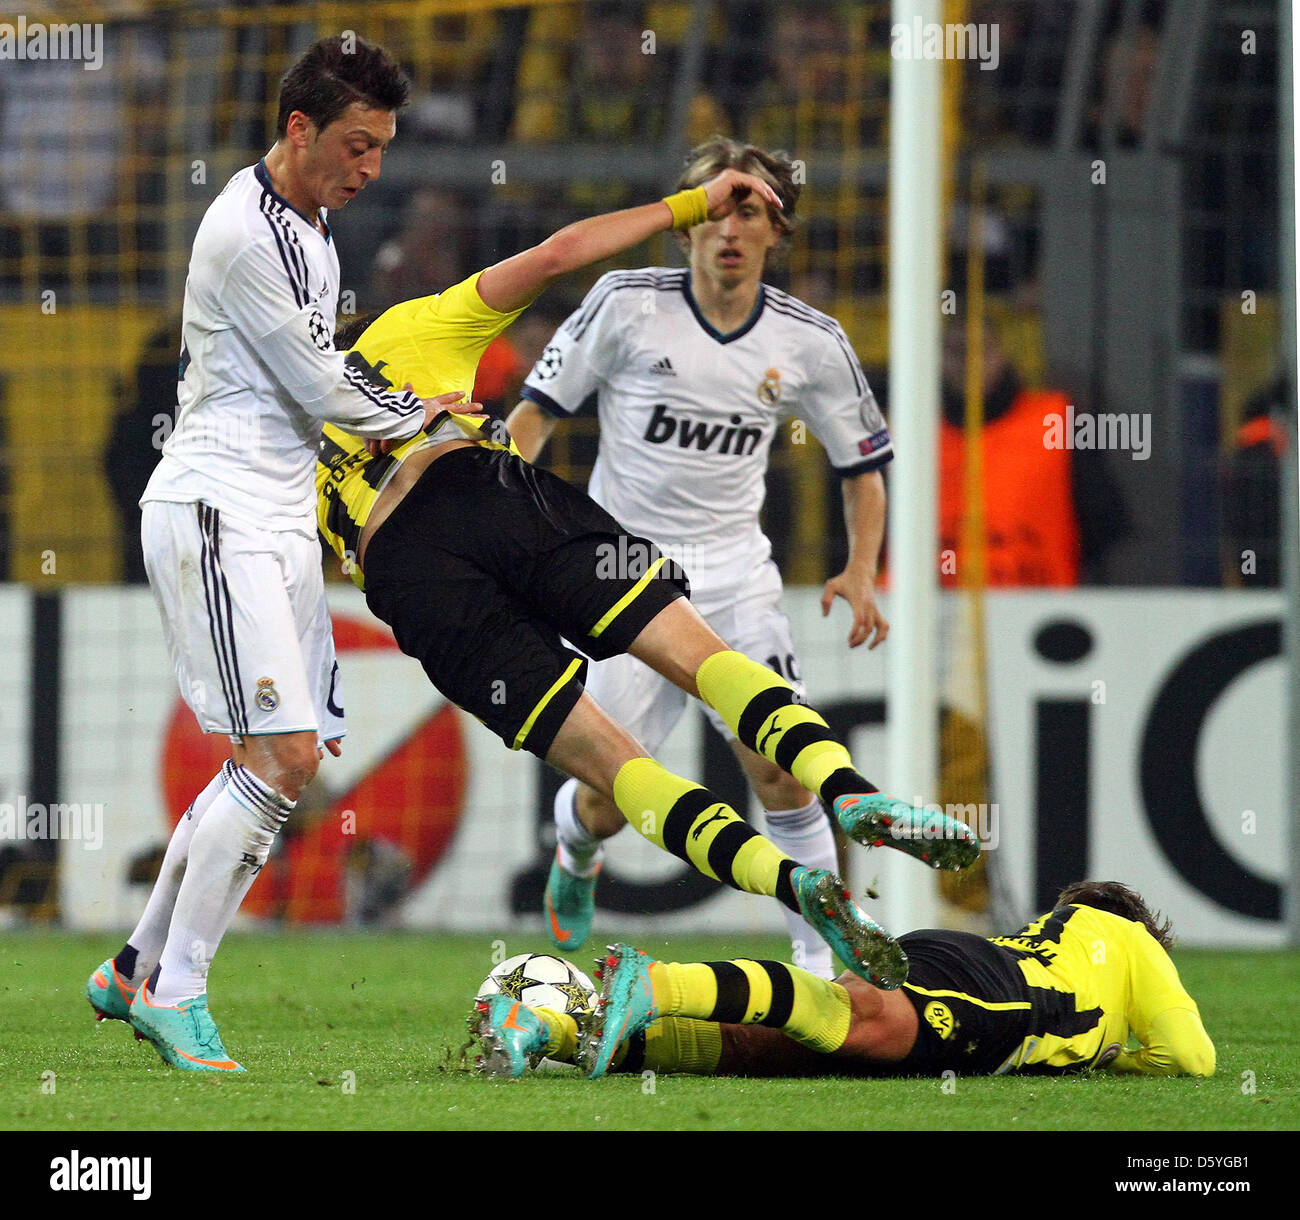 Real Madrid's Mesut Özil (L-R) vies with Dortmunds Kevin Großkreutz and Mario Götze for the ball during the Champions League Group D soccer match between Borussia Dortmund and Real Madrid at BVB Stadium Dortmund in Dortmund, Germany, 24 October 2012. Photo: Kevin Kurek/dpa  +++(c) dpa - Bildfunk+++ Stock Photo